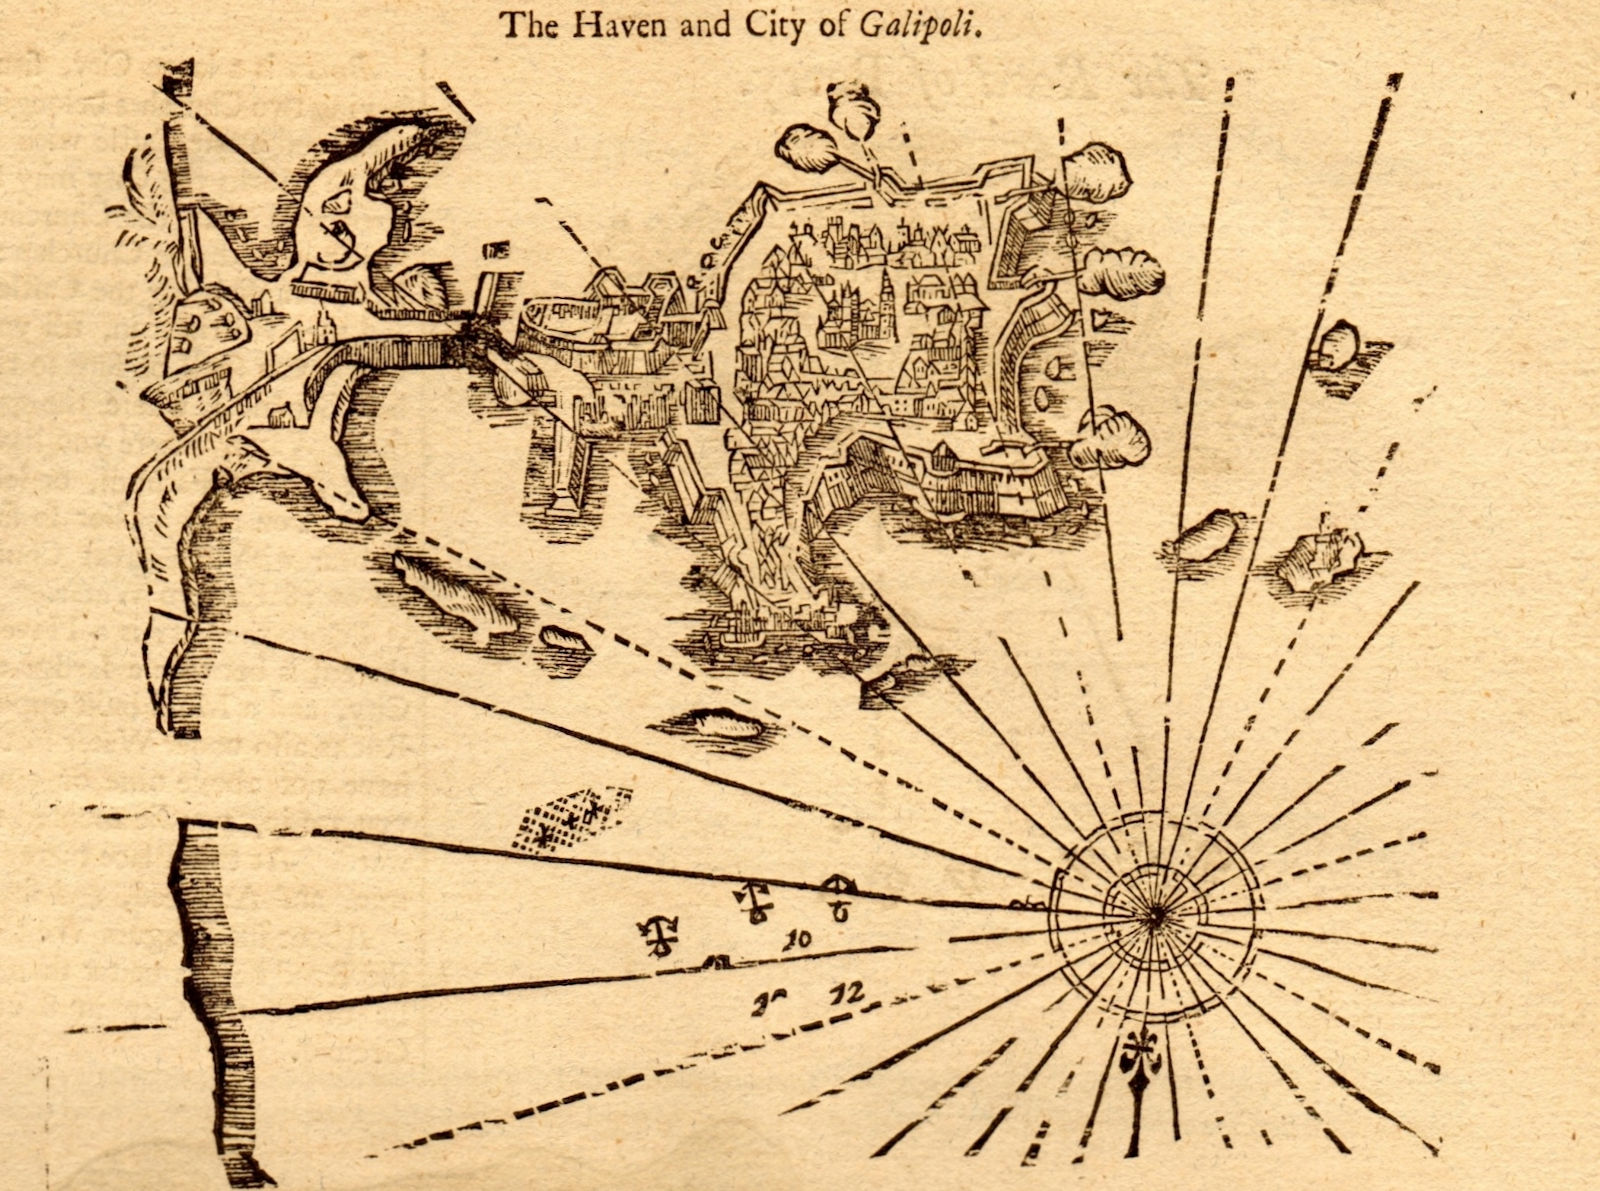 "The haven and city of Galipoli". Gallipoli, Apulia. MOUNT & PAGE chart 1747 map